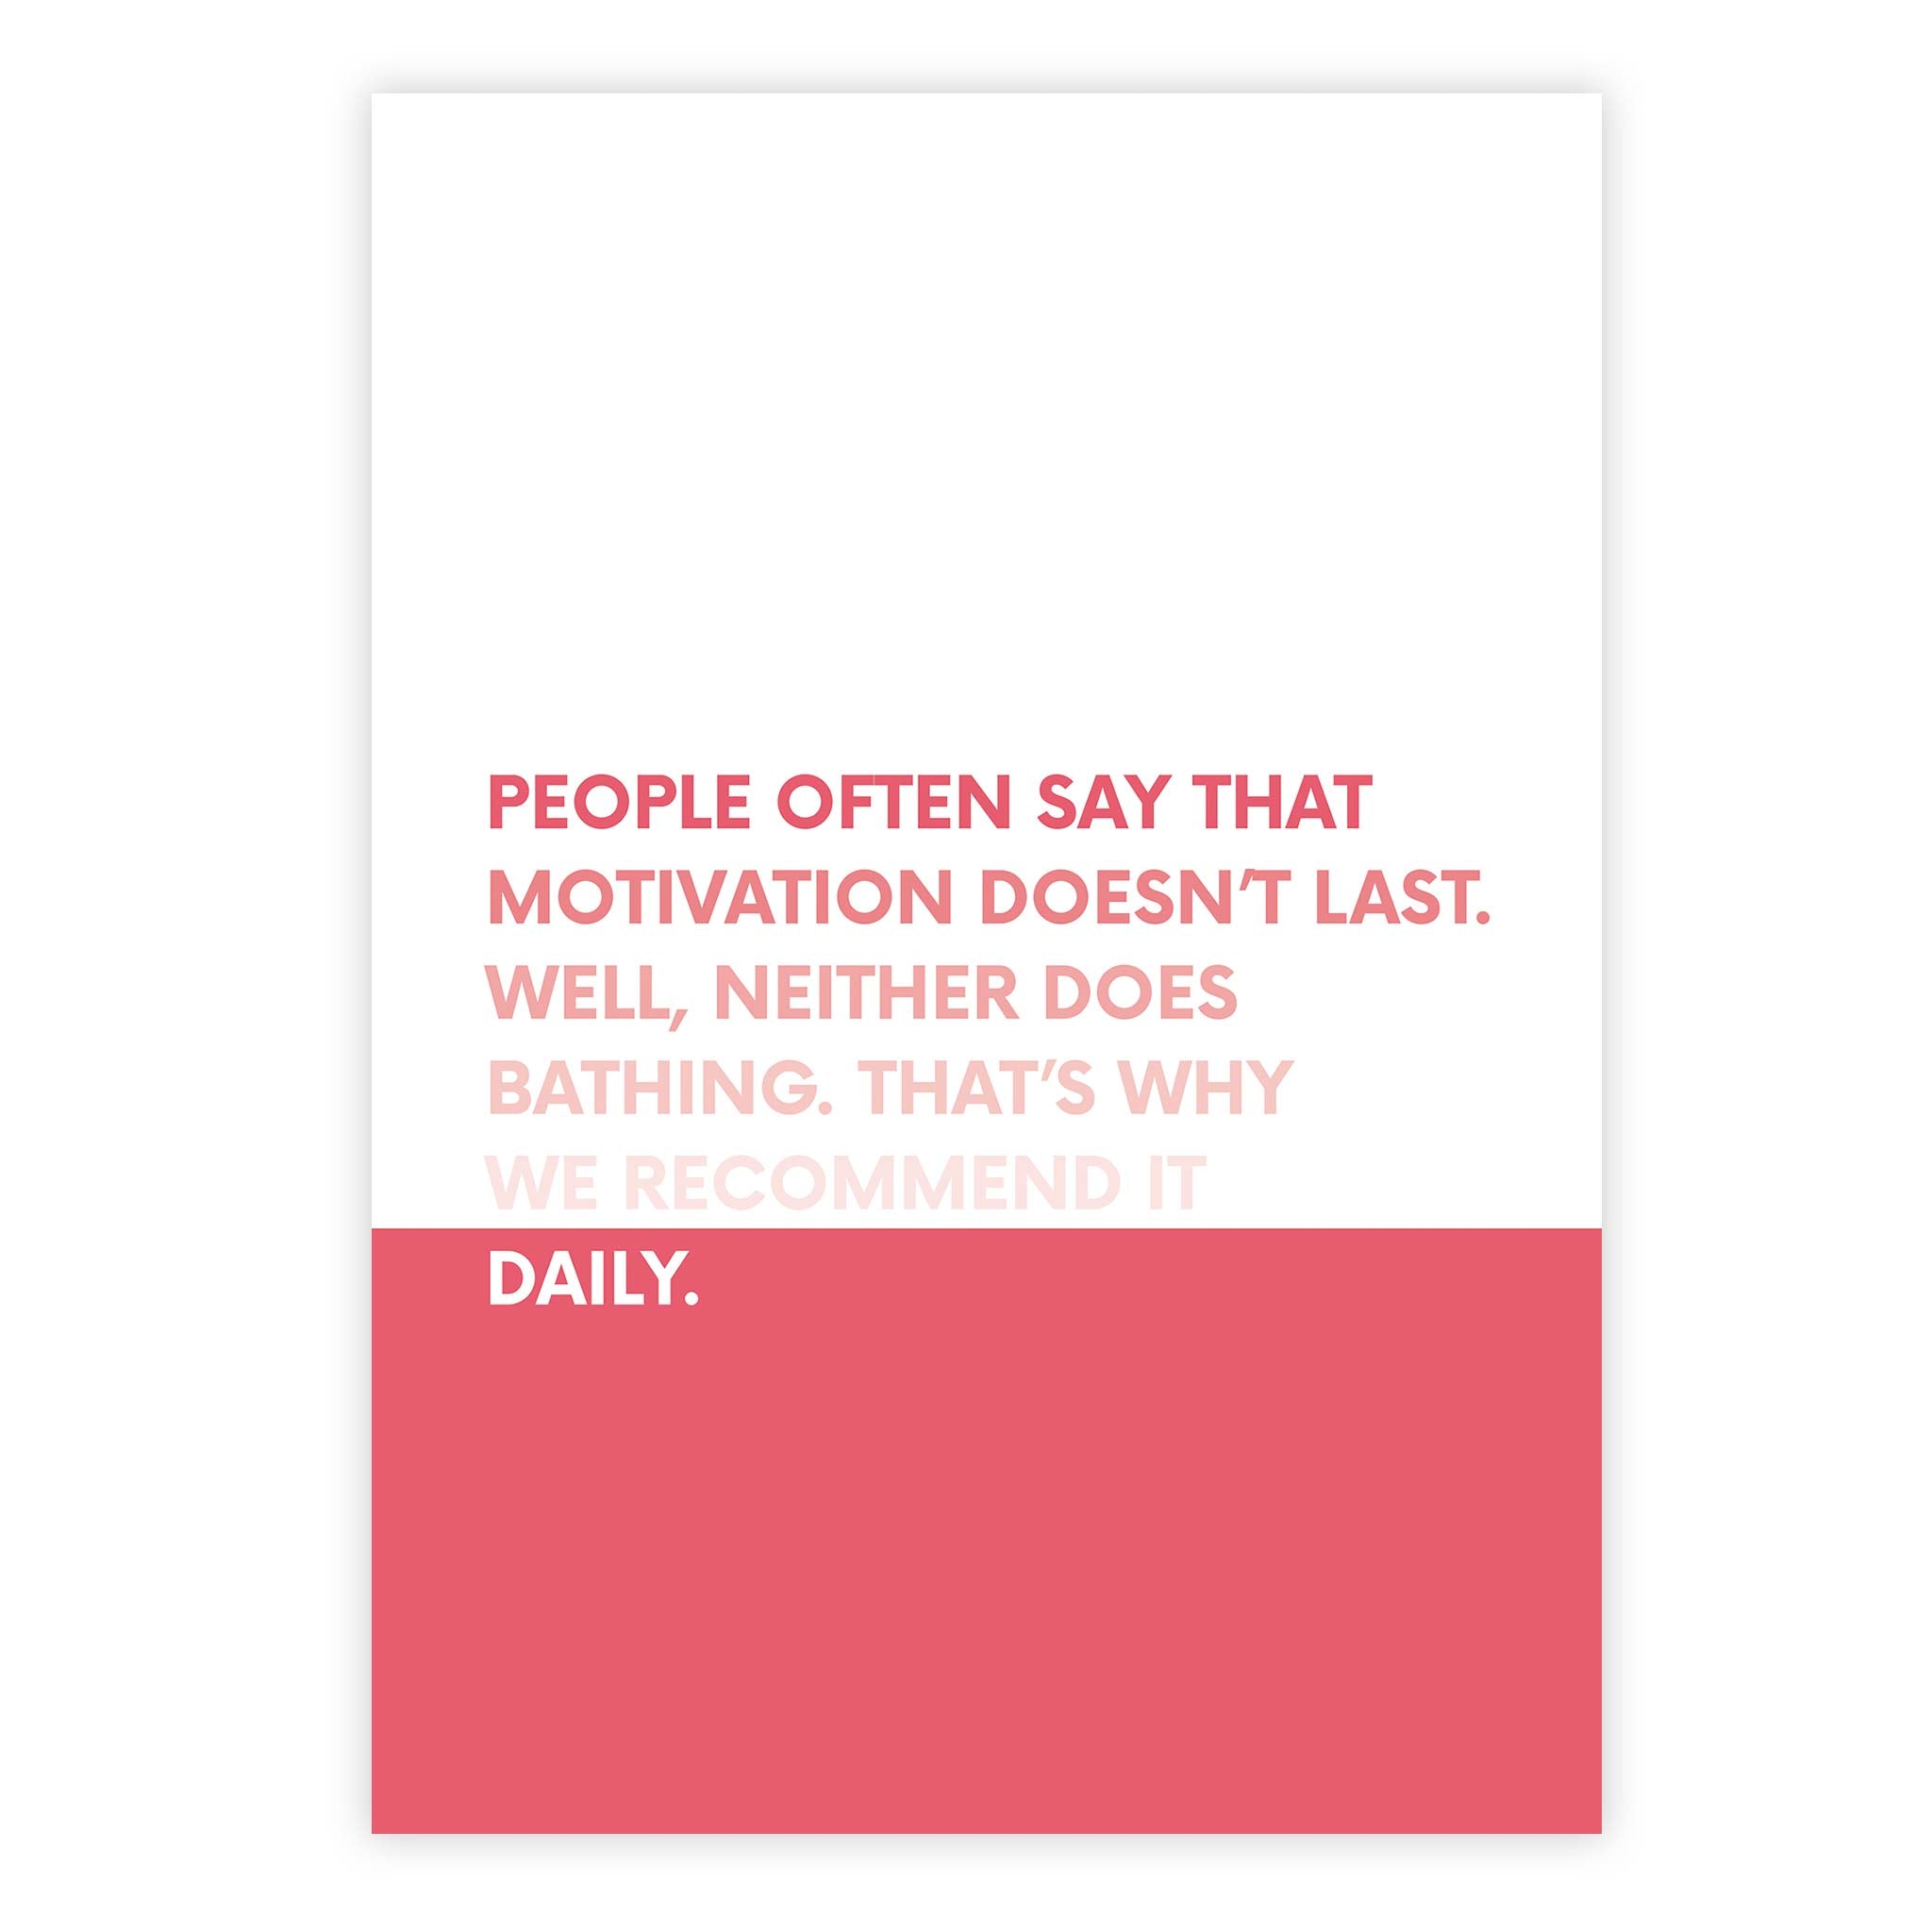 People often say that motivation doesn’t last. Well, neither does bathing. That’s why we recommend it daily